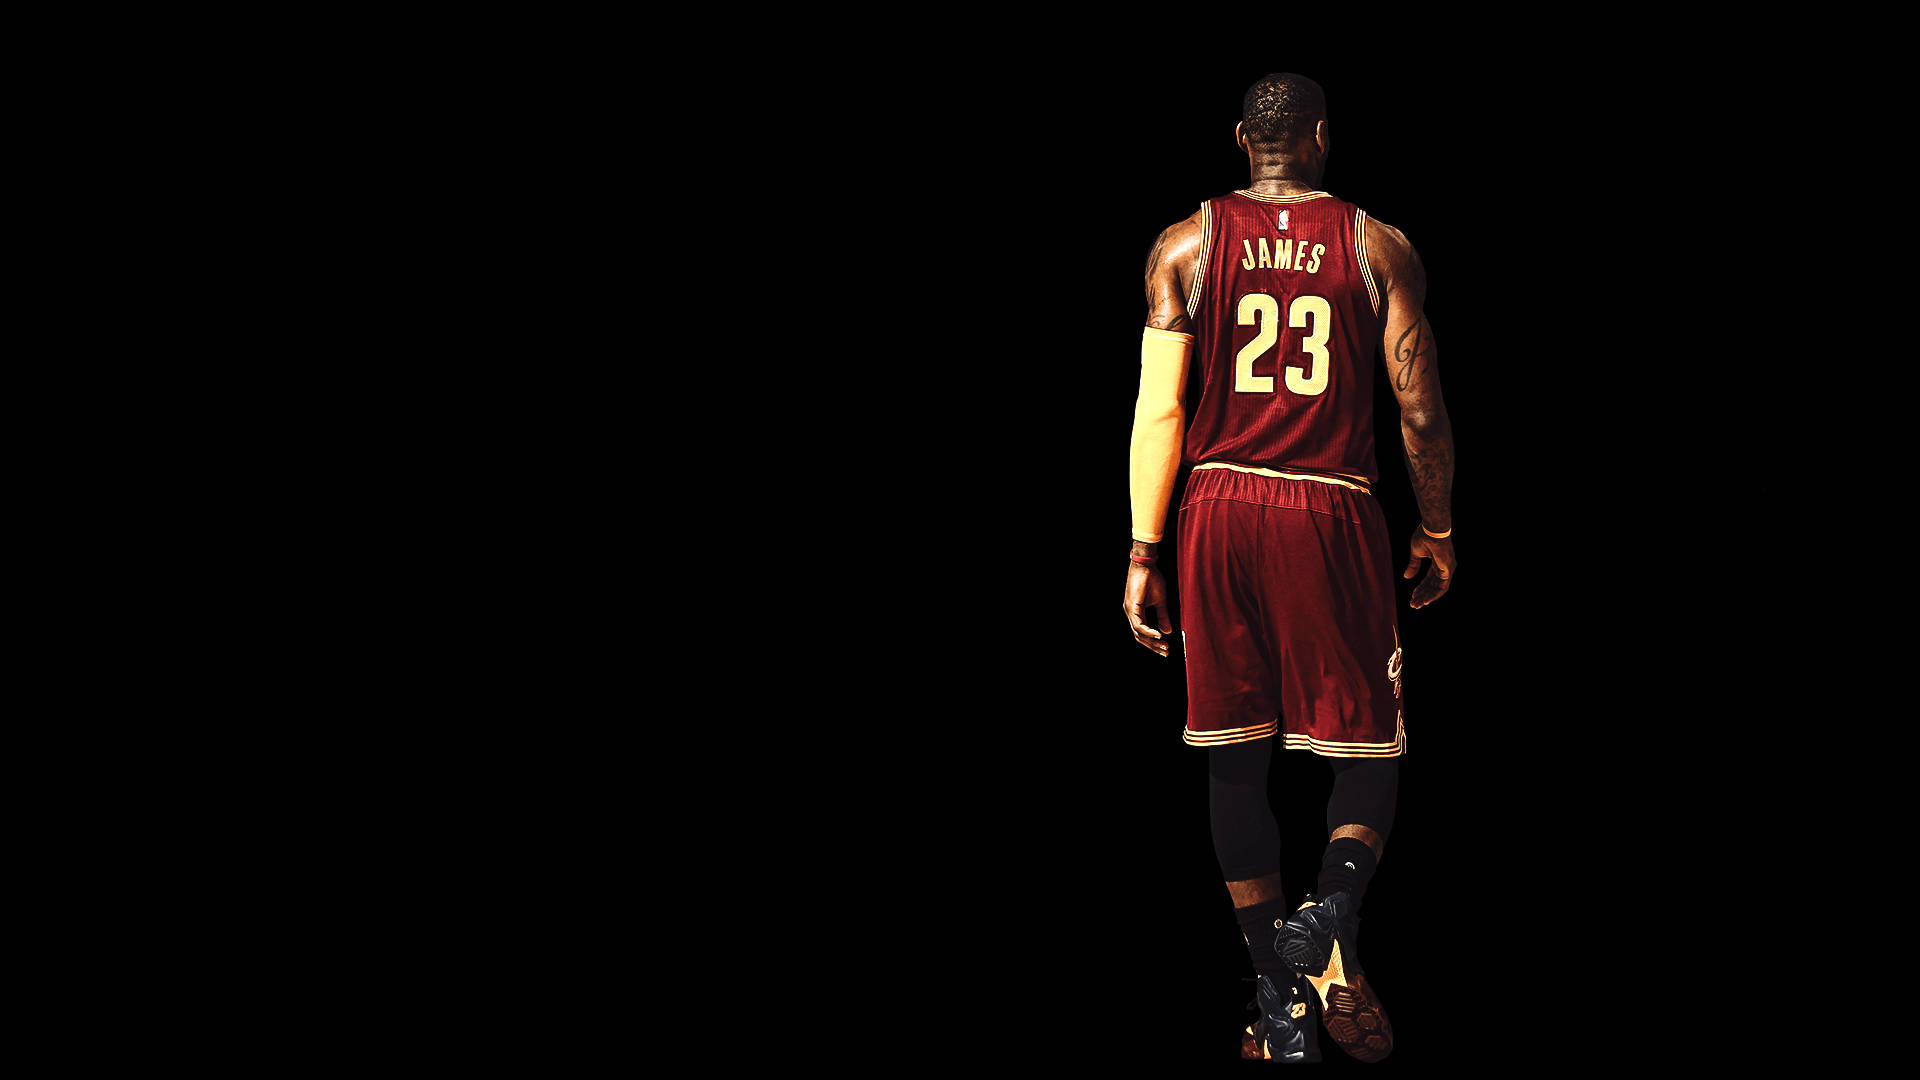 King James Rules The Court! Background